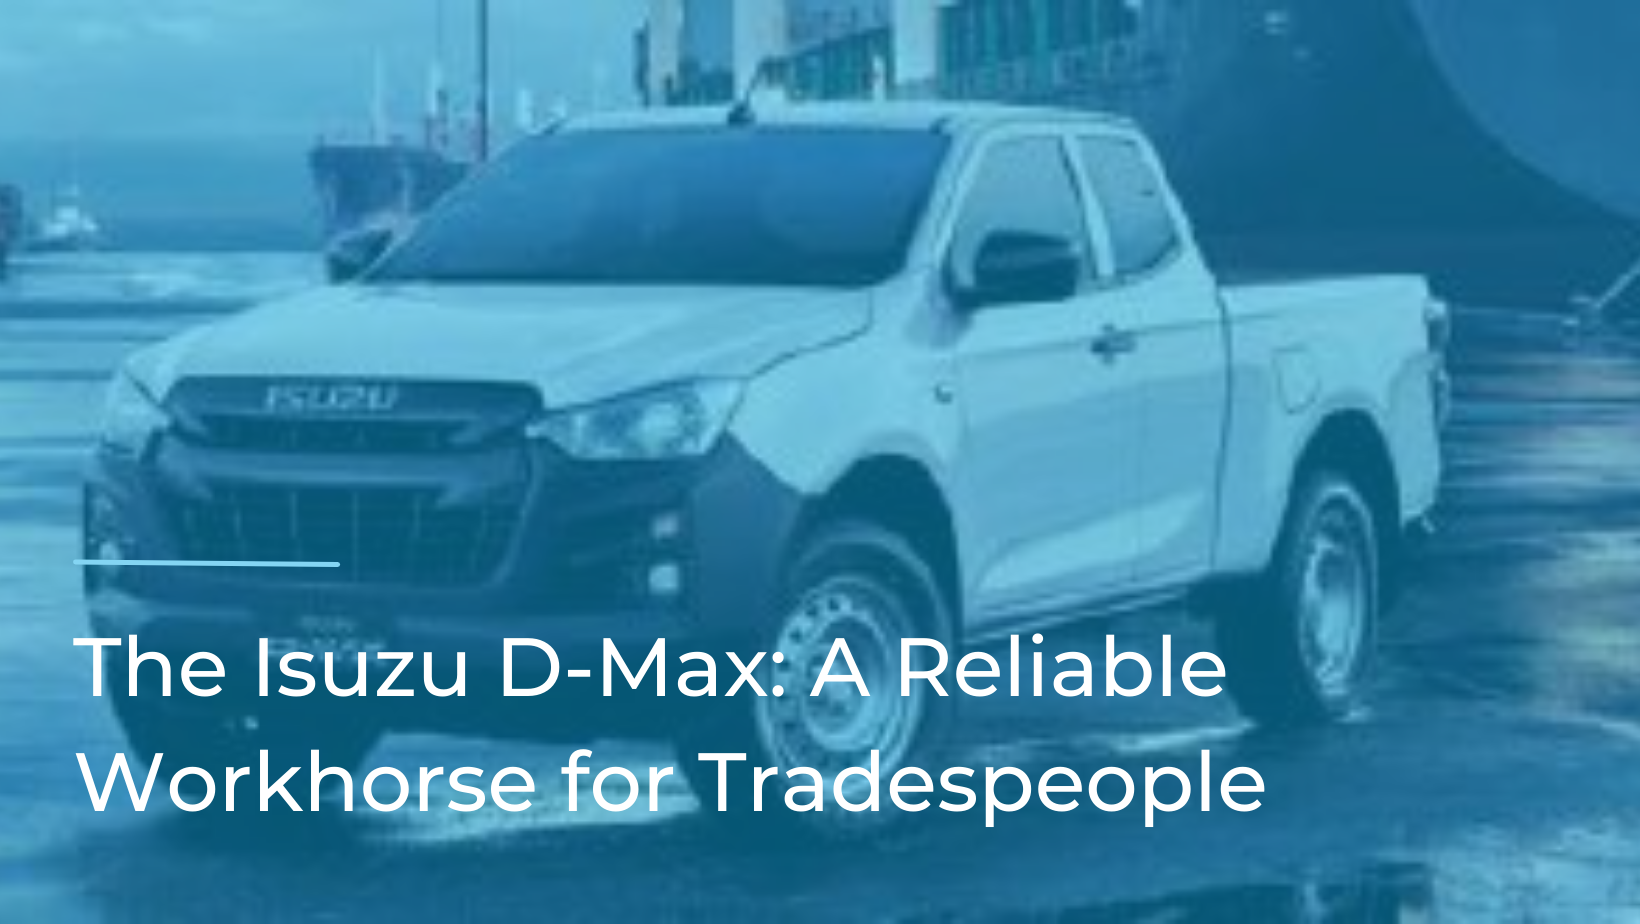 Isuzu - The D-Max: A Reliable Workhorse for Tradespeople